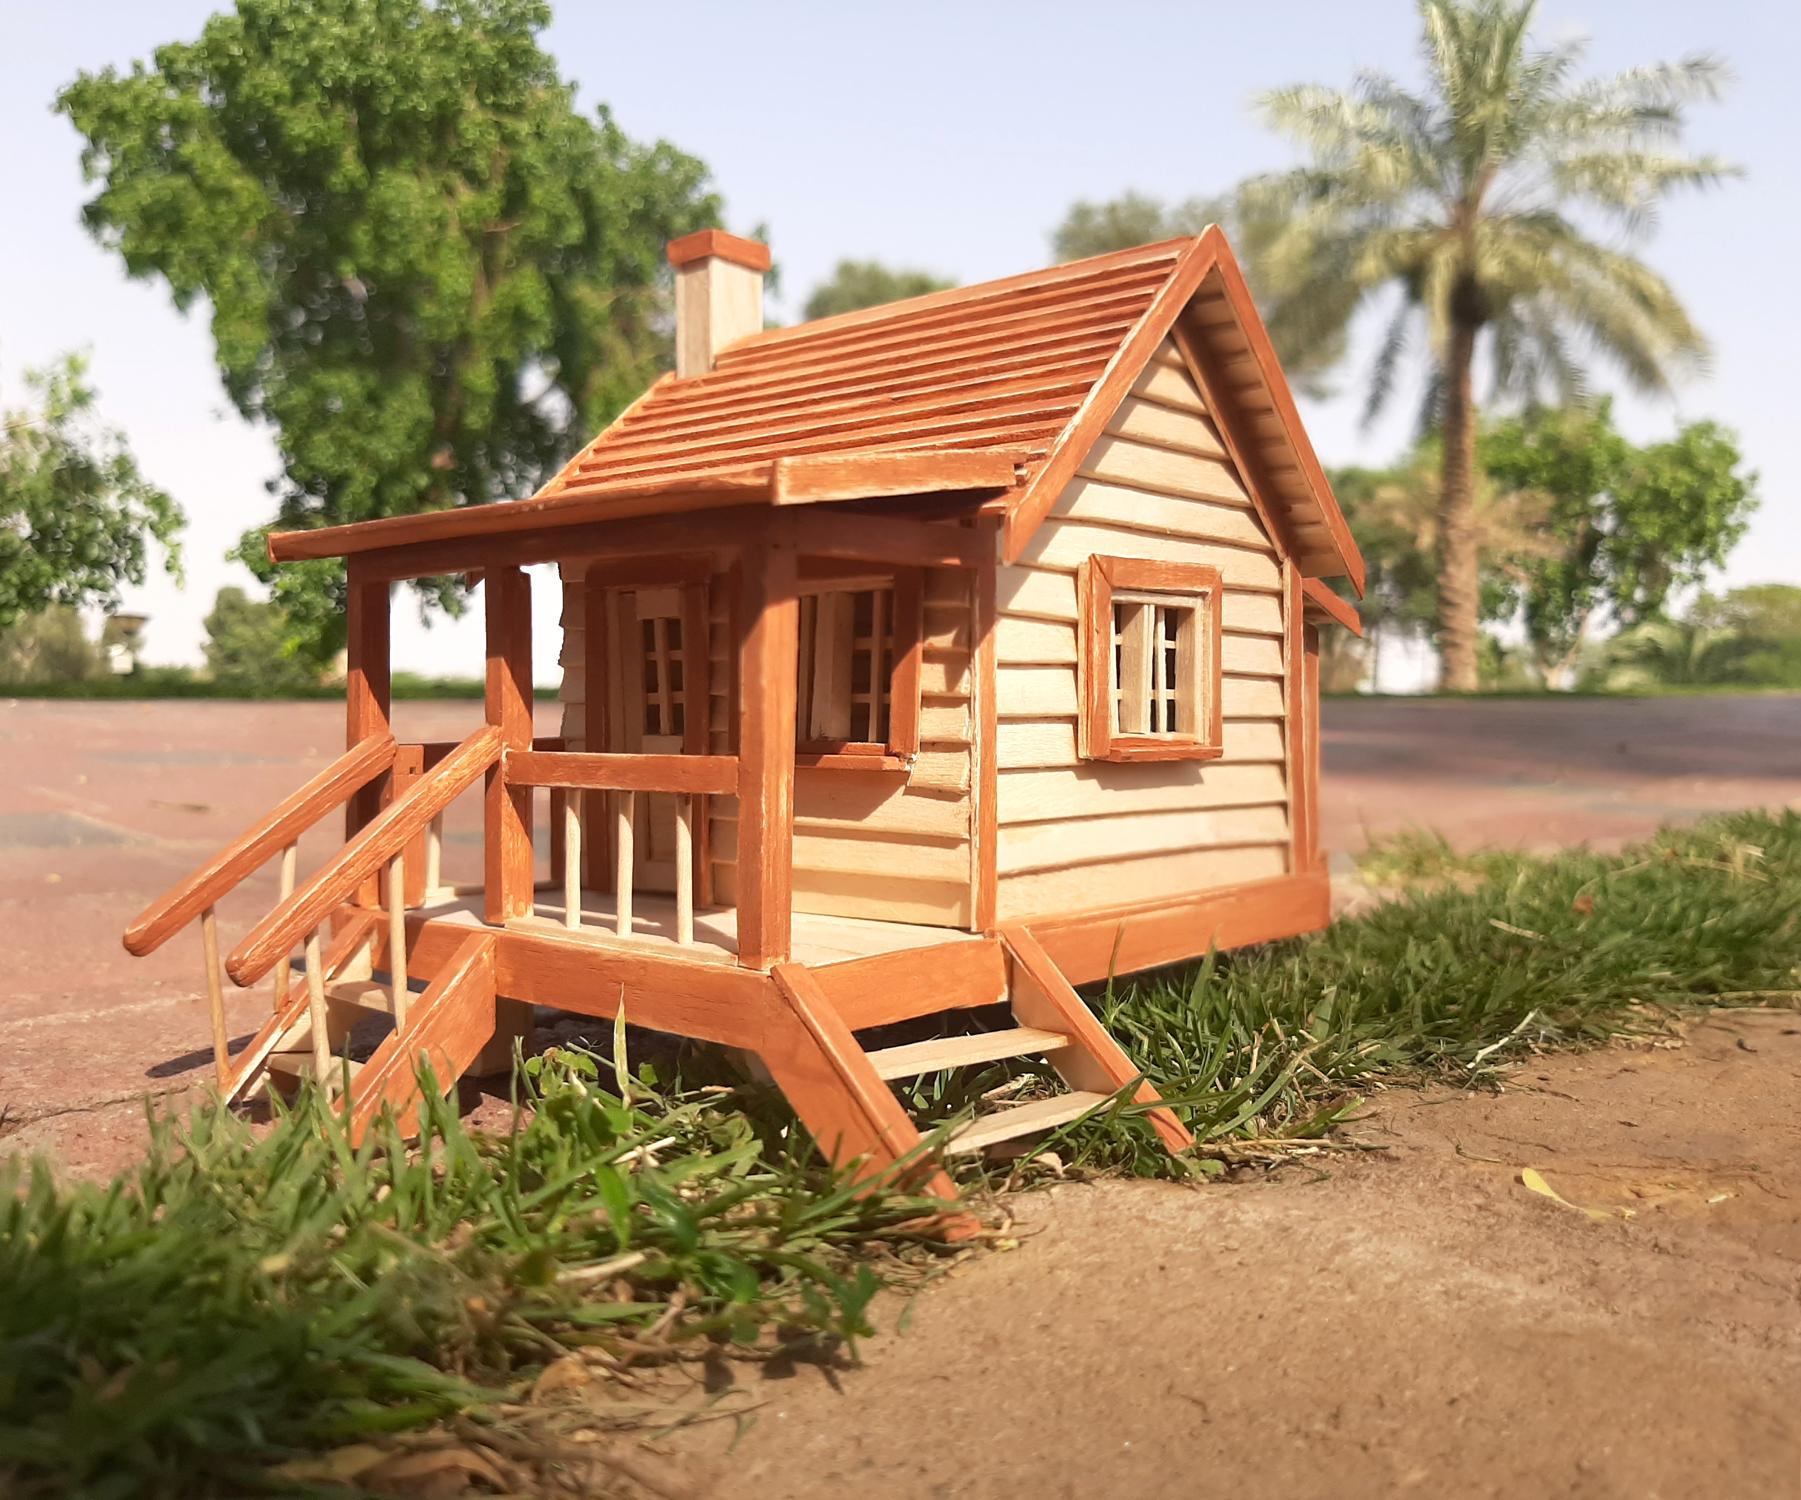 Western Wooden House Using Popsicle Stick